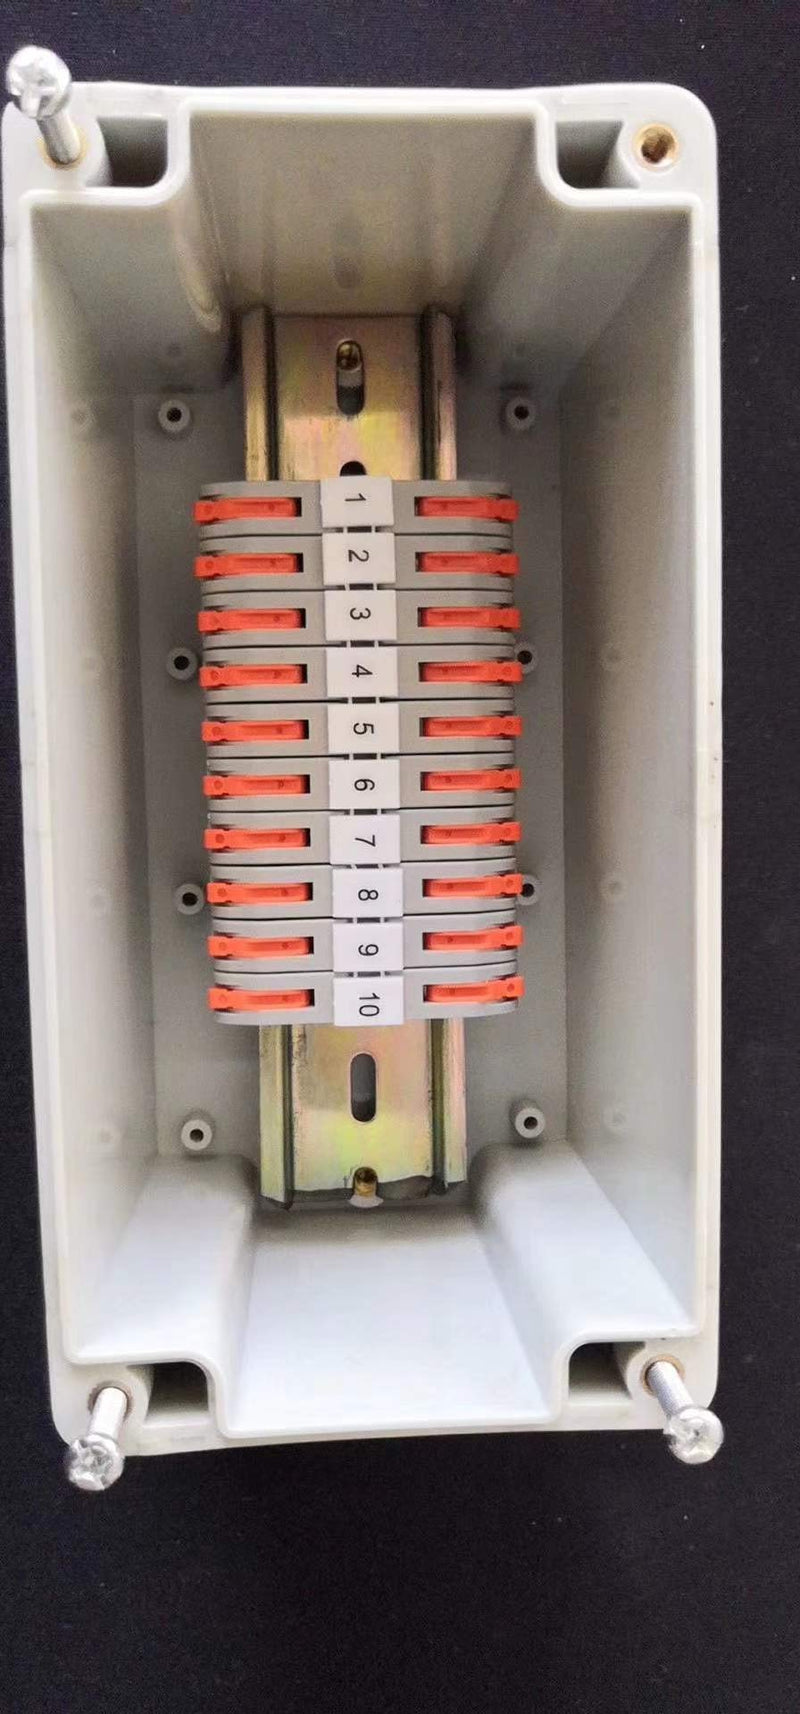 [Australia - AusPower] - UOHGDPY DIN Rail Terminal Blocks kit,Universal Compact Wire Wiring Connector (10 pcs connectors+Article in Parallel+ Digital Identification+Screw) 10 pcs connectors+Article in parallel+ Digital identification+screw 